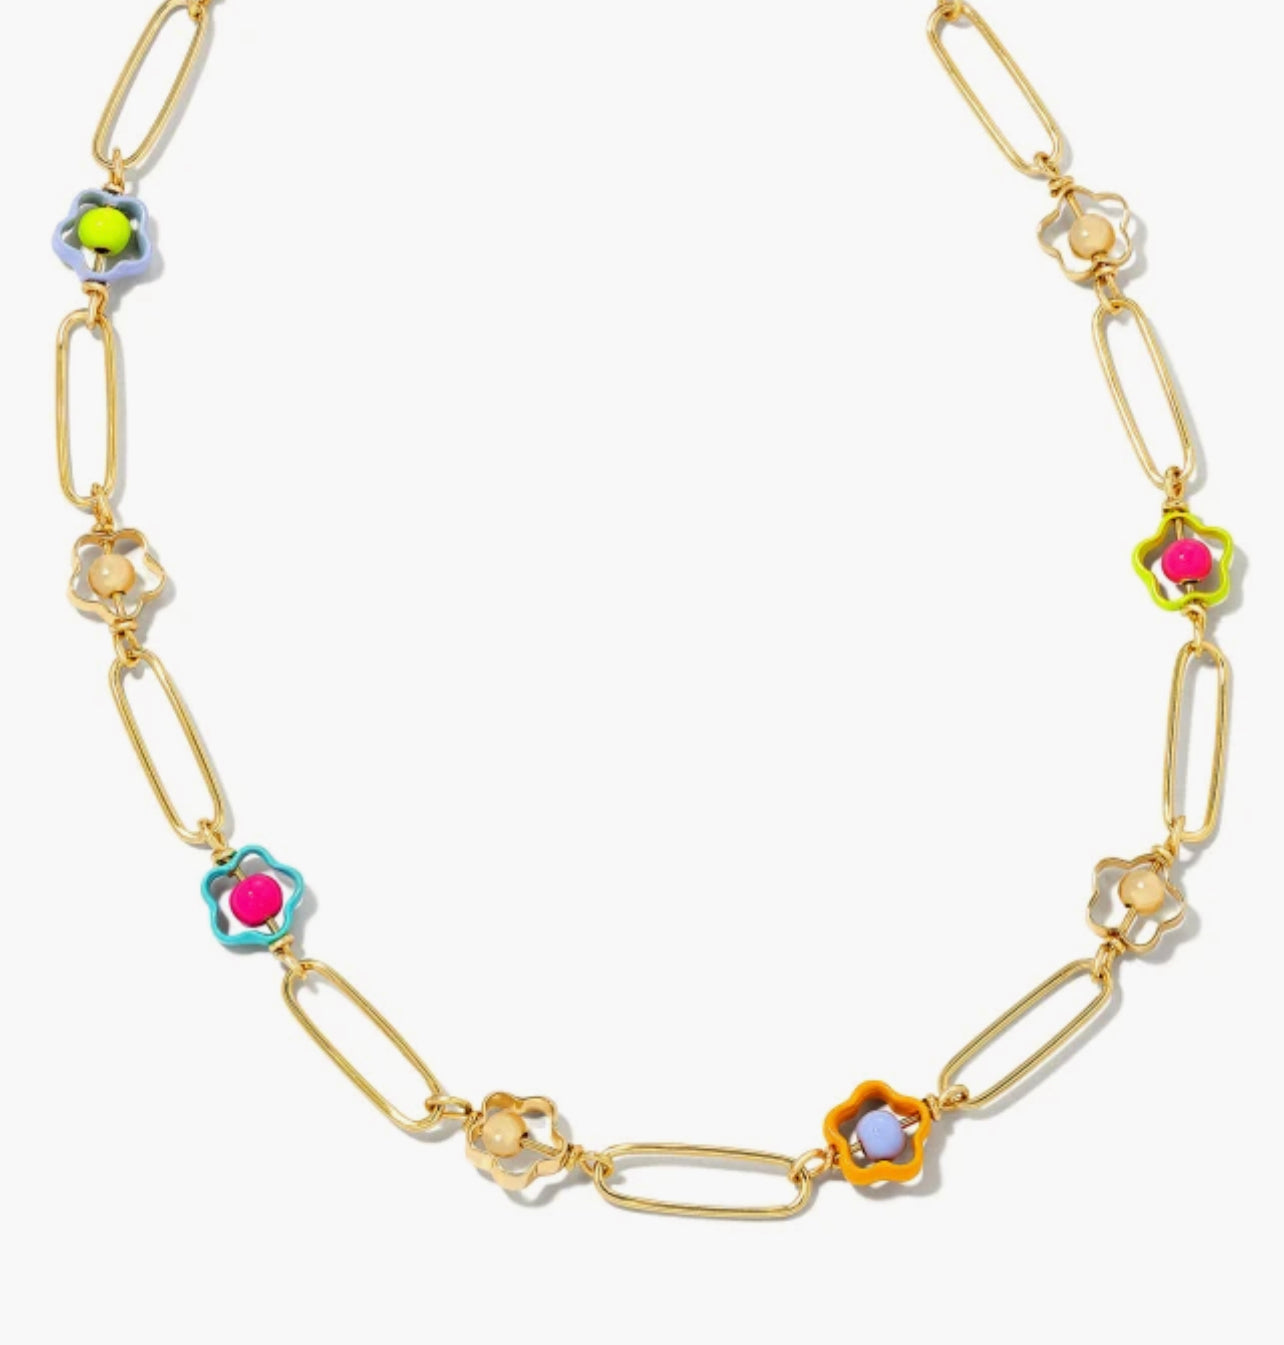 Kendra Scott-Susie Gold Link and Chain Necklace in Rainbow Multi Mix 9608850847